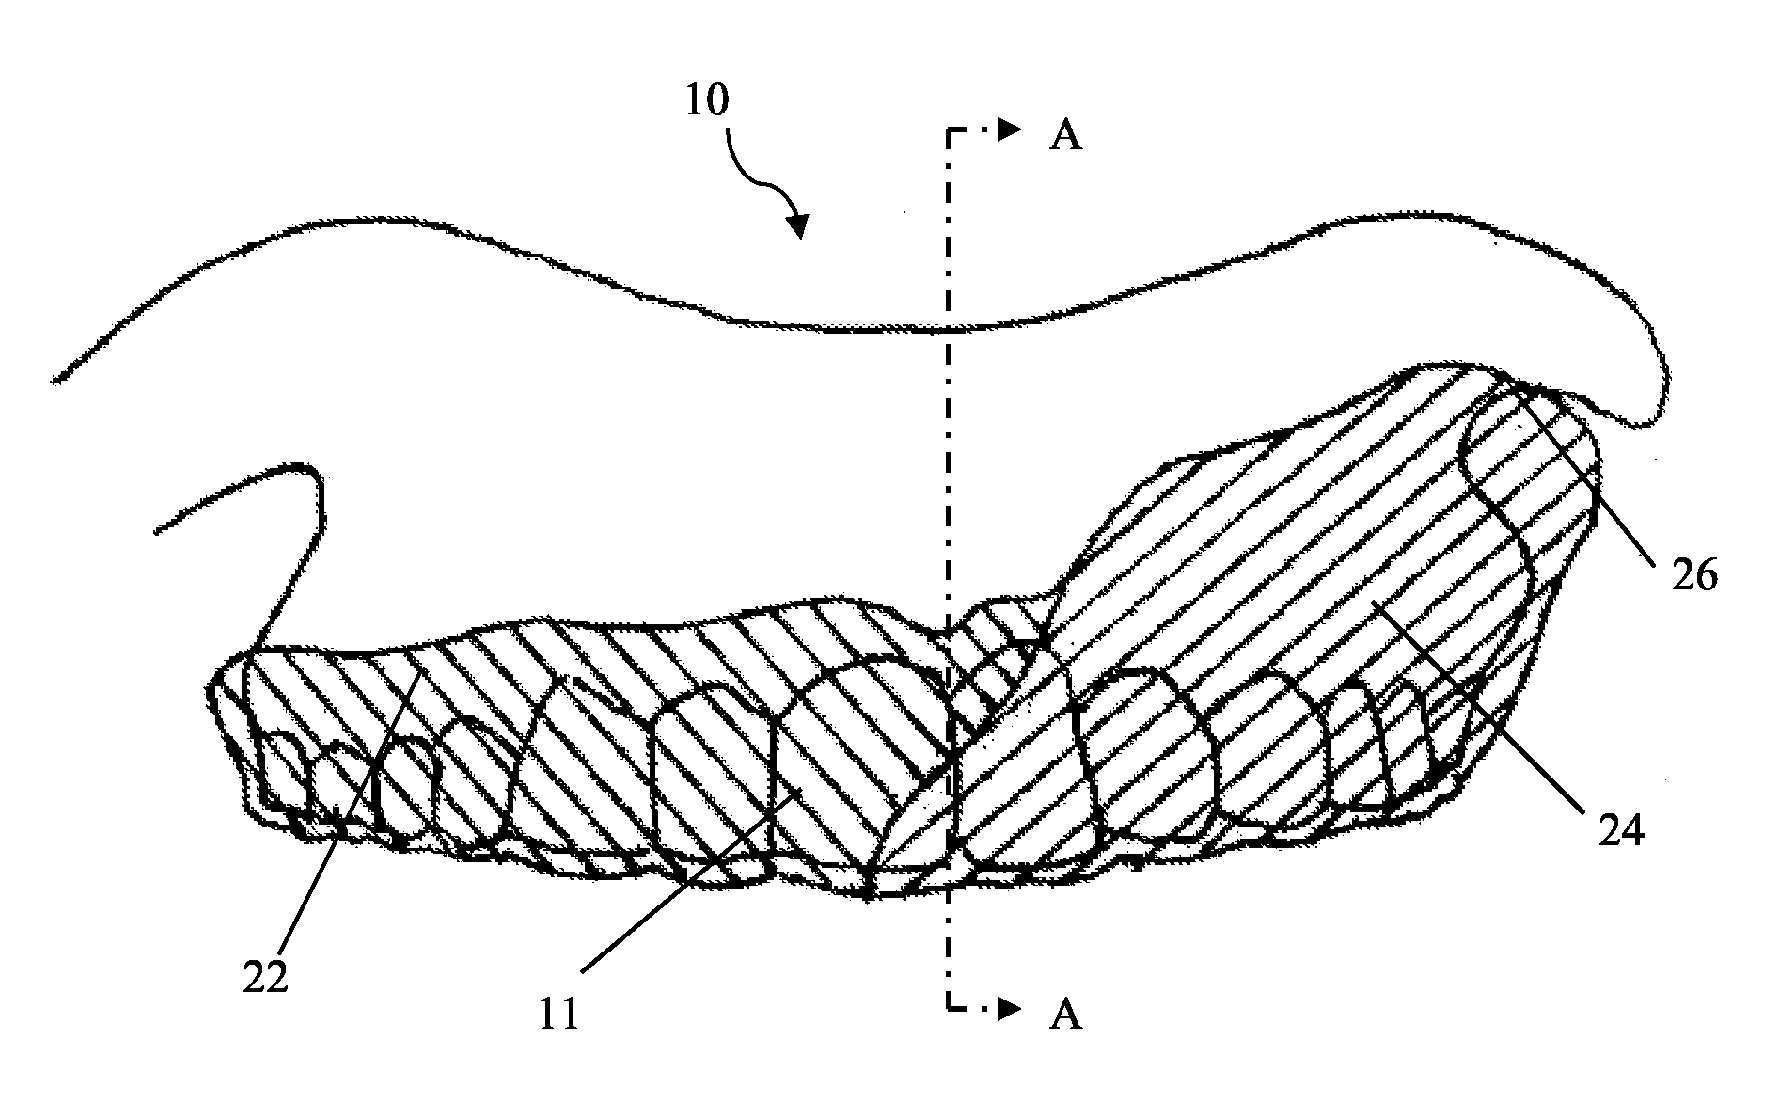 Intra-oral appliance and methods of using same